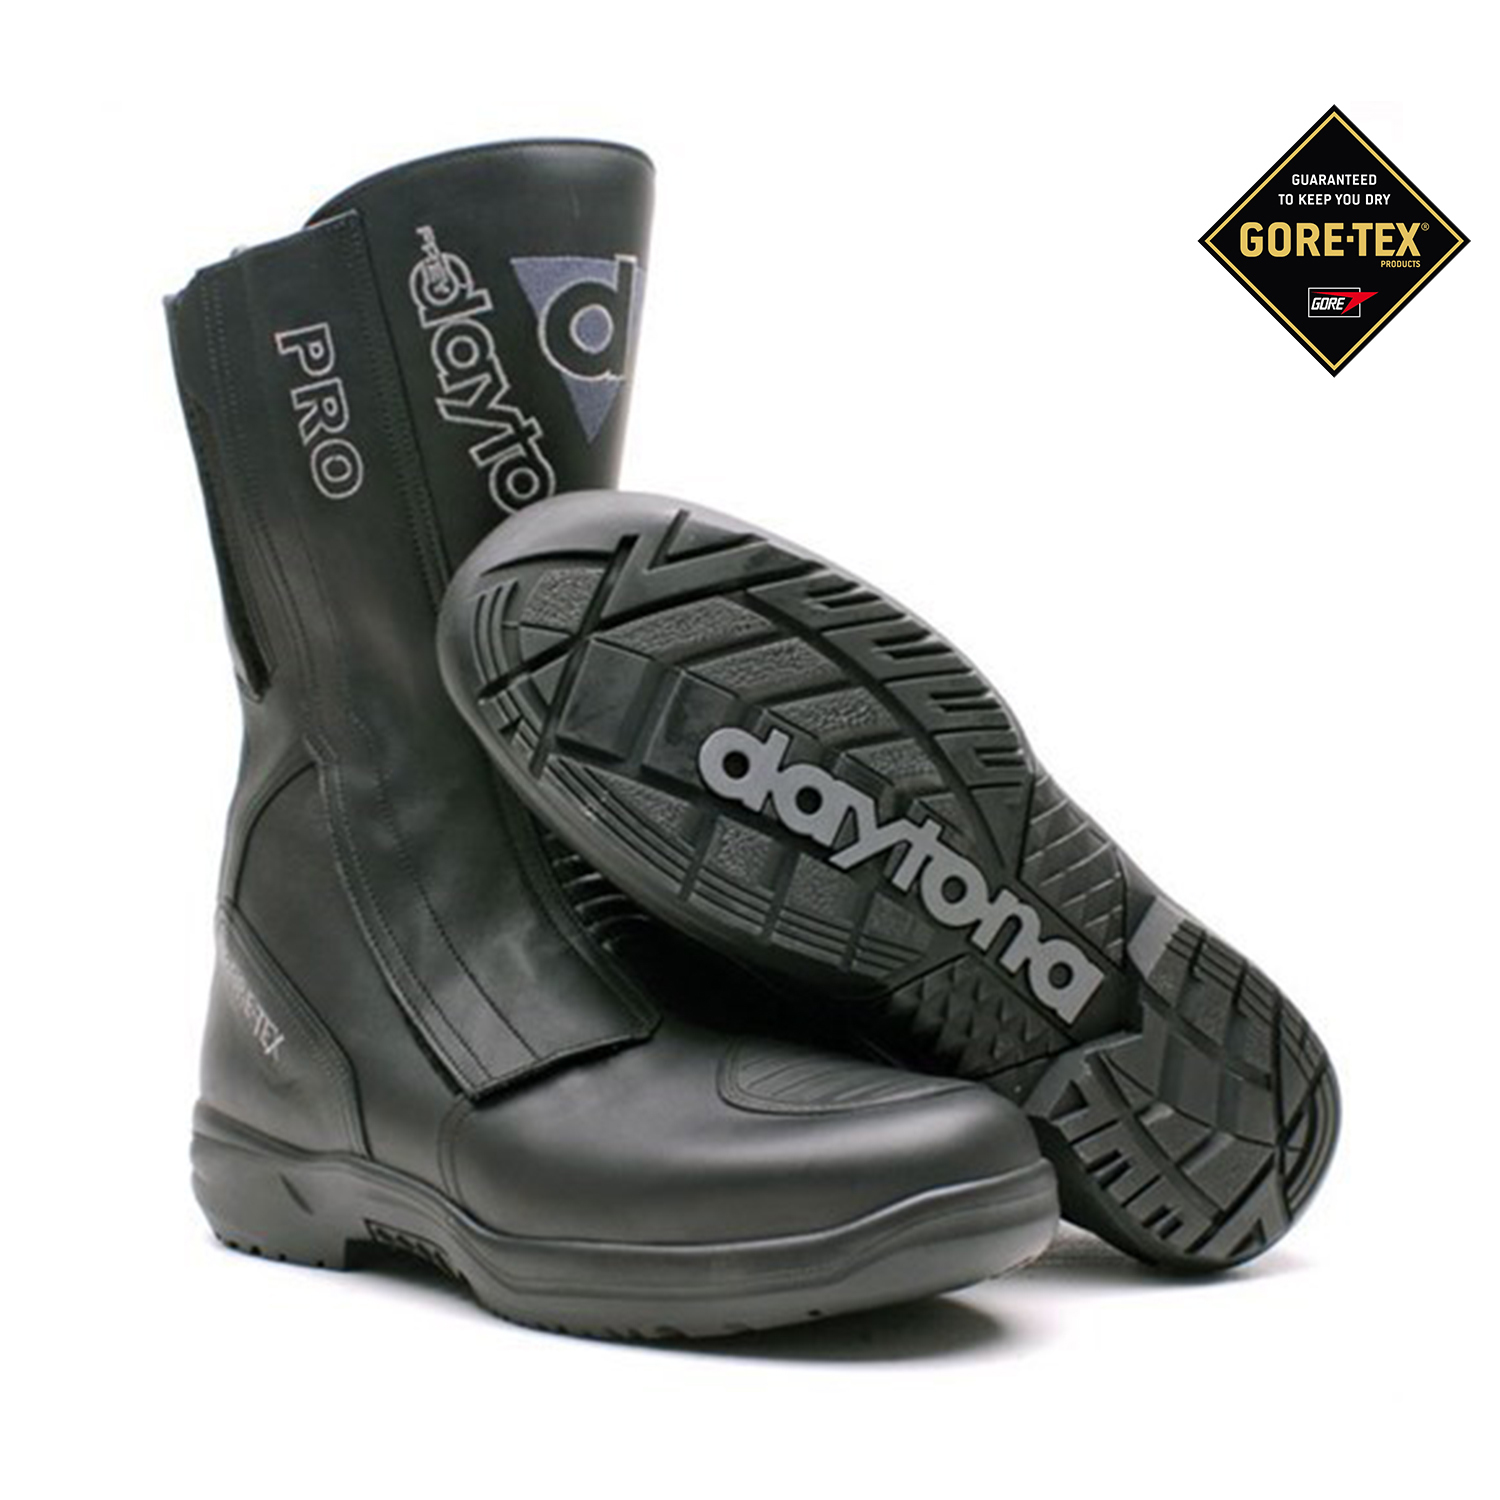 Daytona Travel Star GTX PRO Touring Boots - Available in Various Sizes